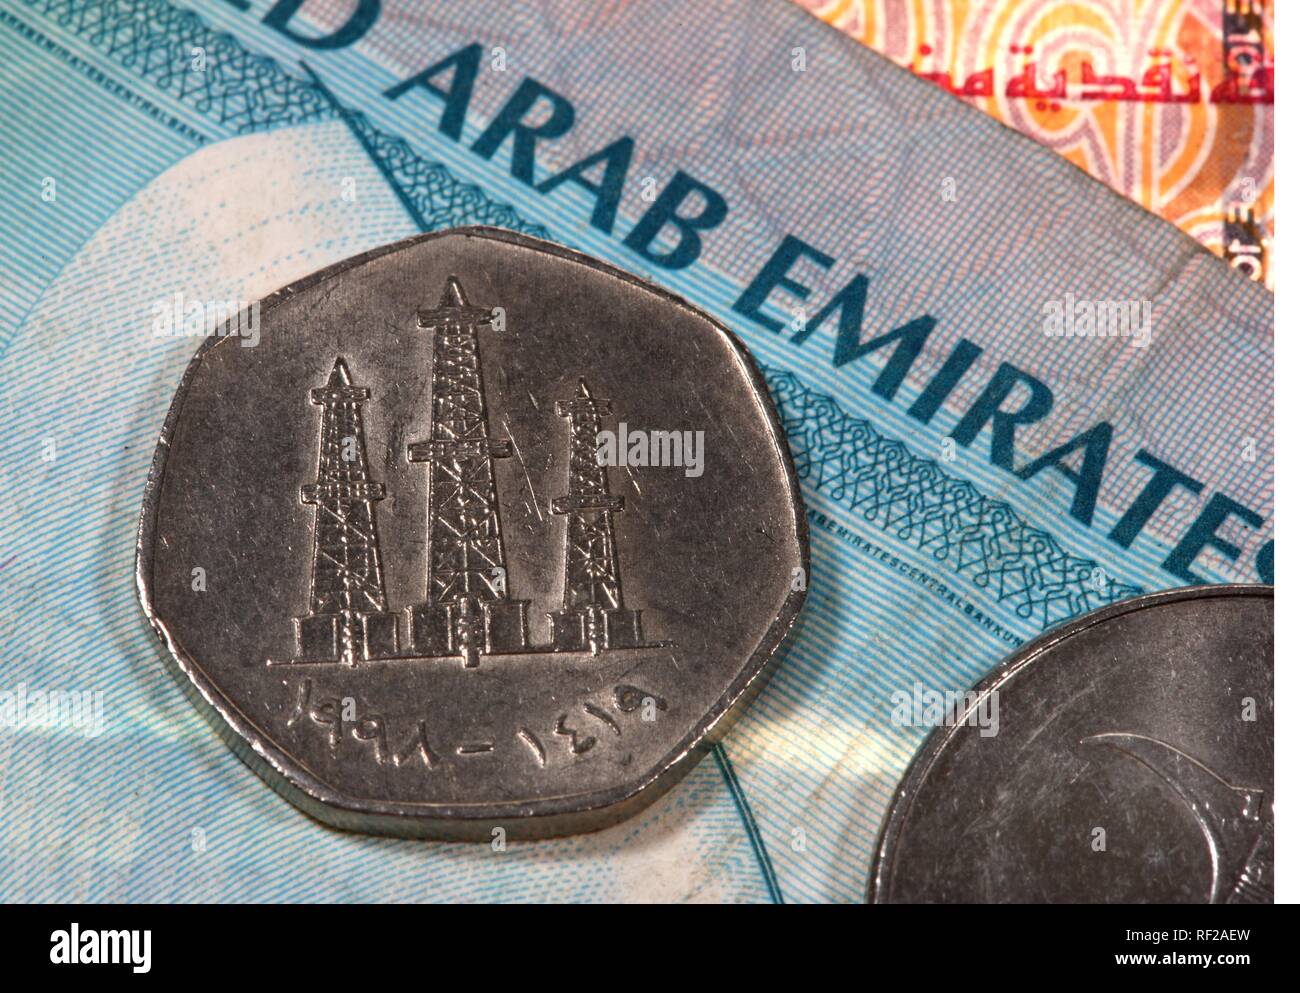 Dirham, AED, coin featuring oil tower motif, United Arab Emirates or UAE currency Stock Photo